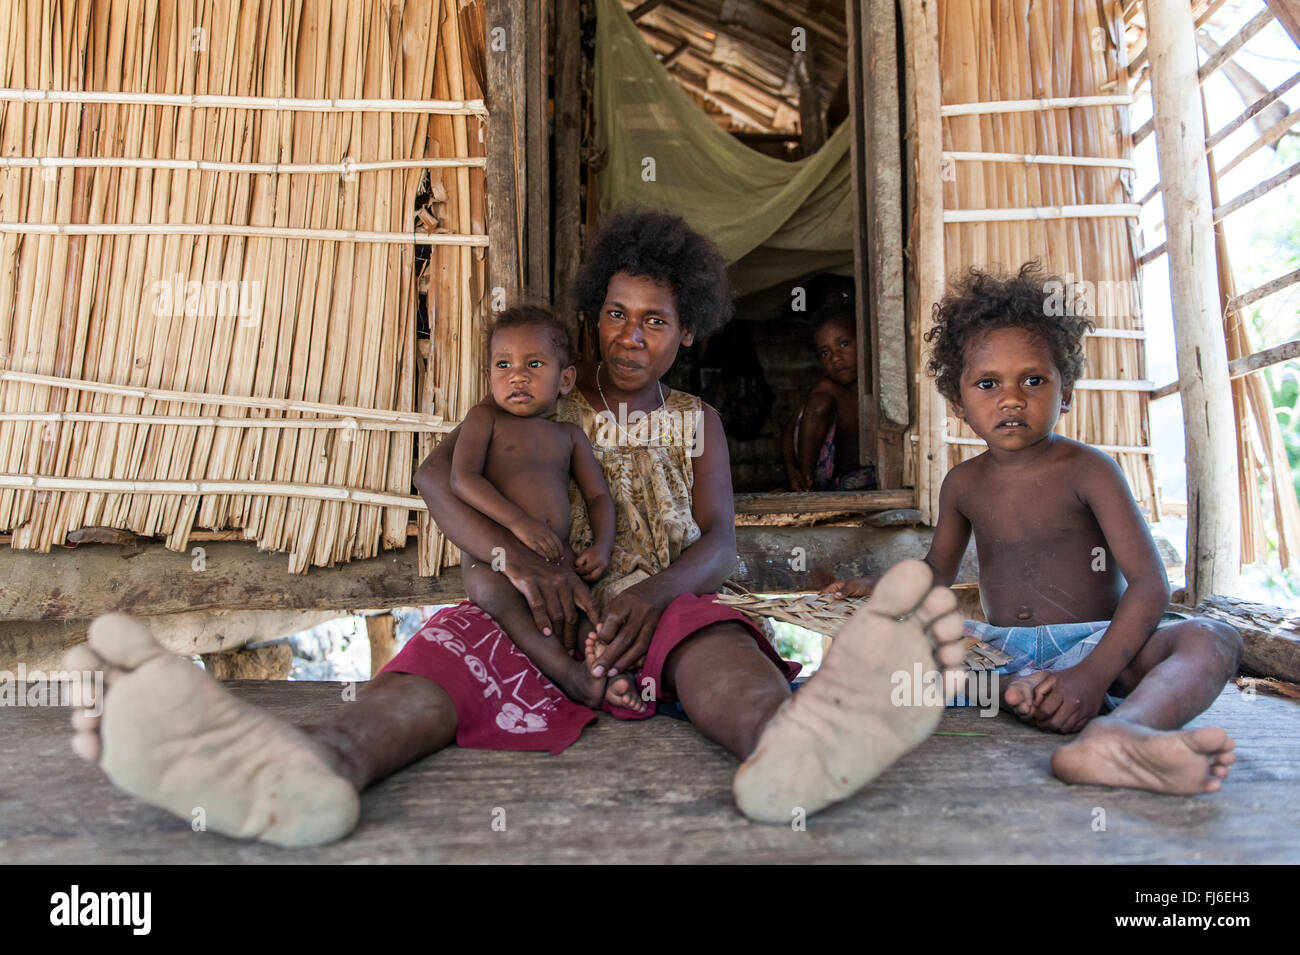 Local woman with children by her house Kuiawa, Papua New Guinea Stock Photo